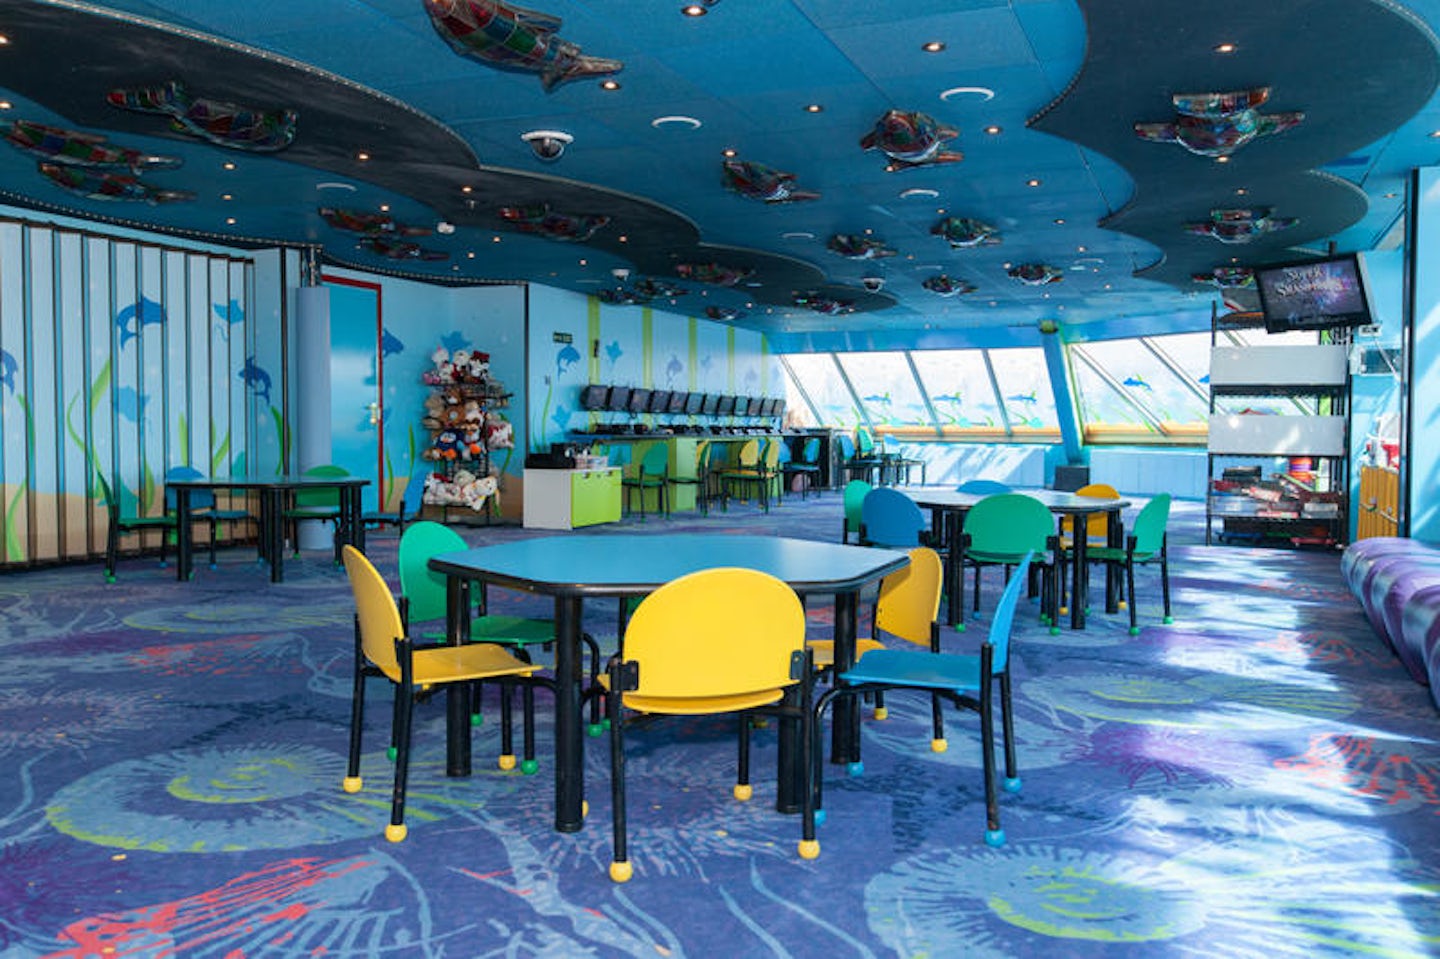 Camp Ocean on Carnival Conquest